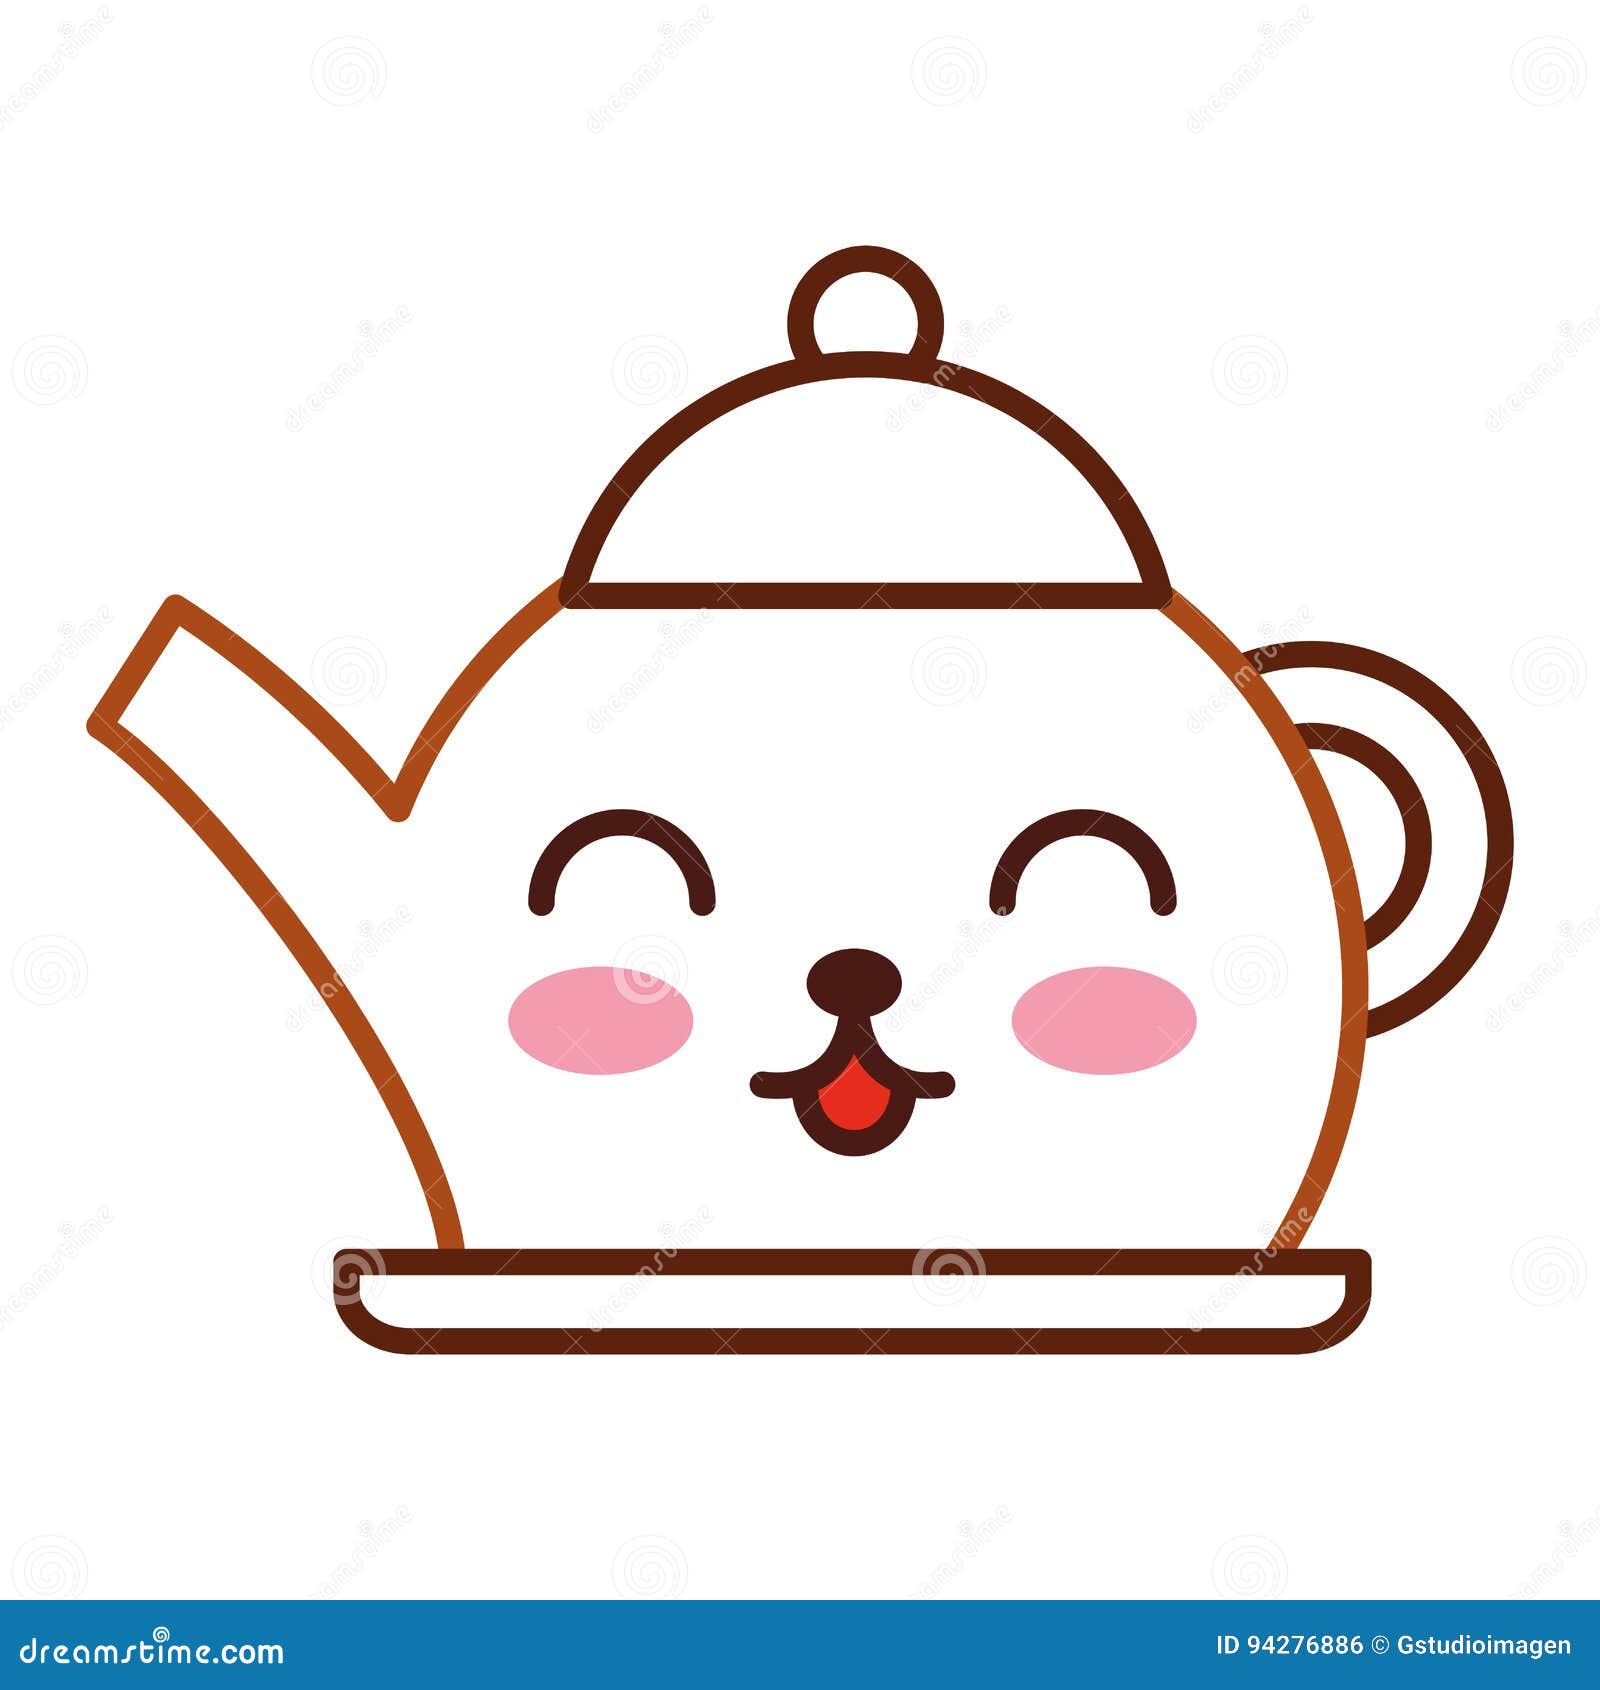 Coffee Teapot Kawaii Character Stock Vector - Illustration of cafeteria ...